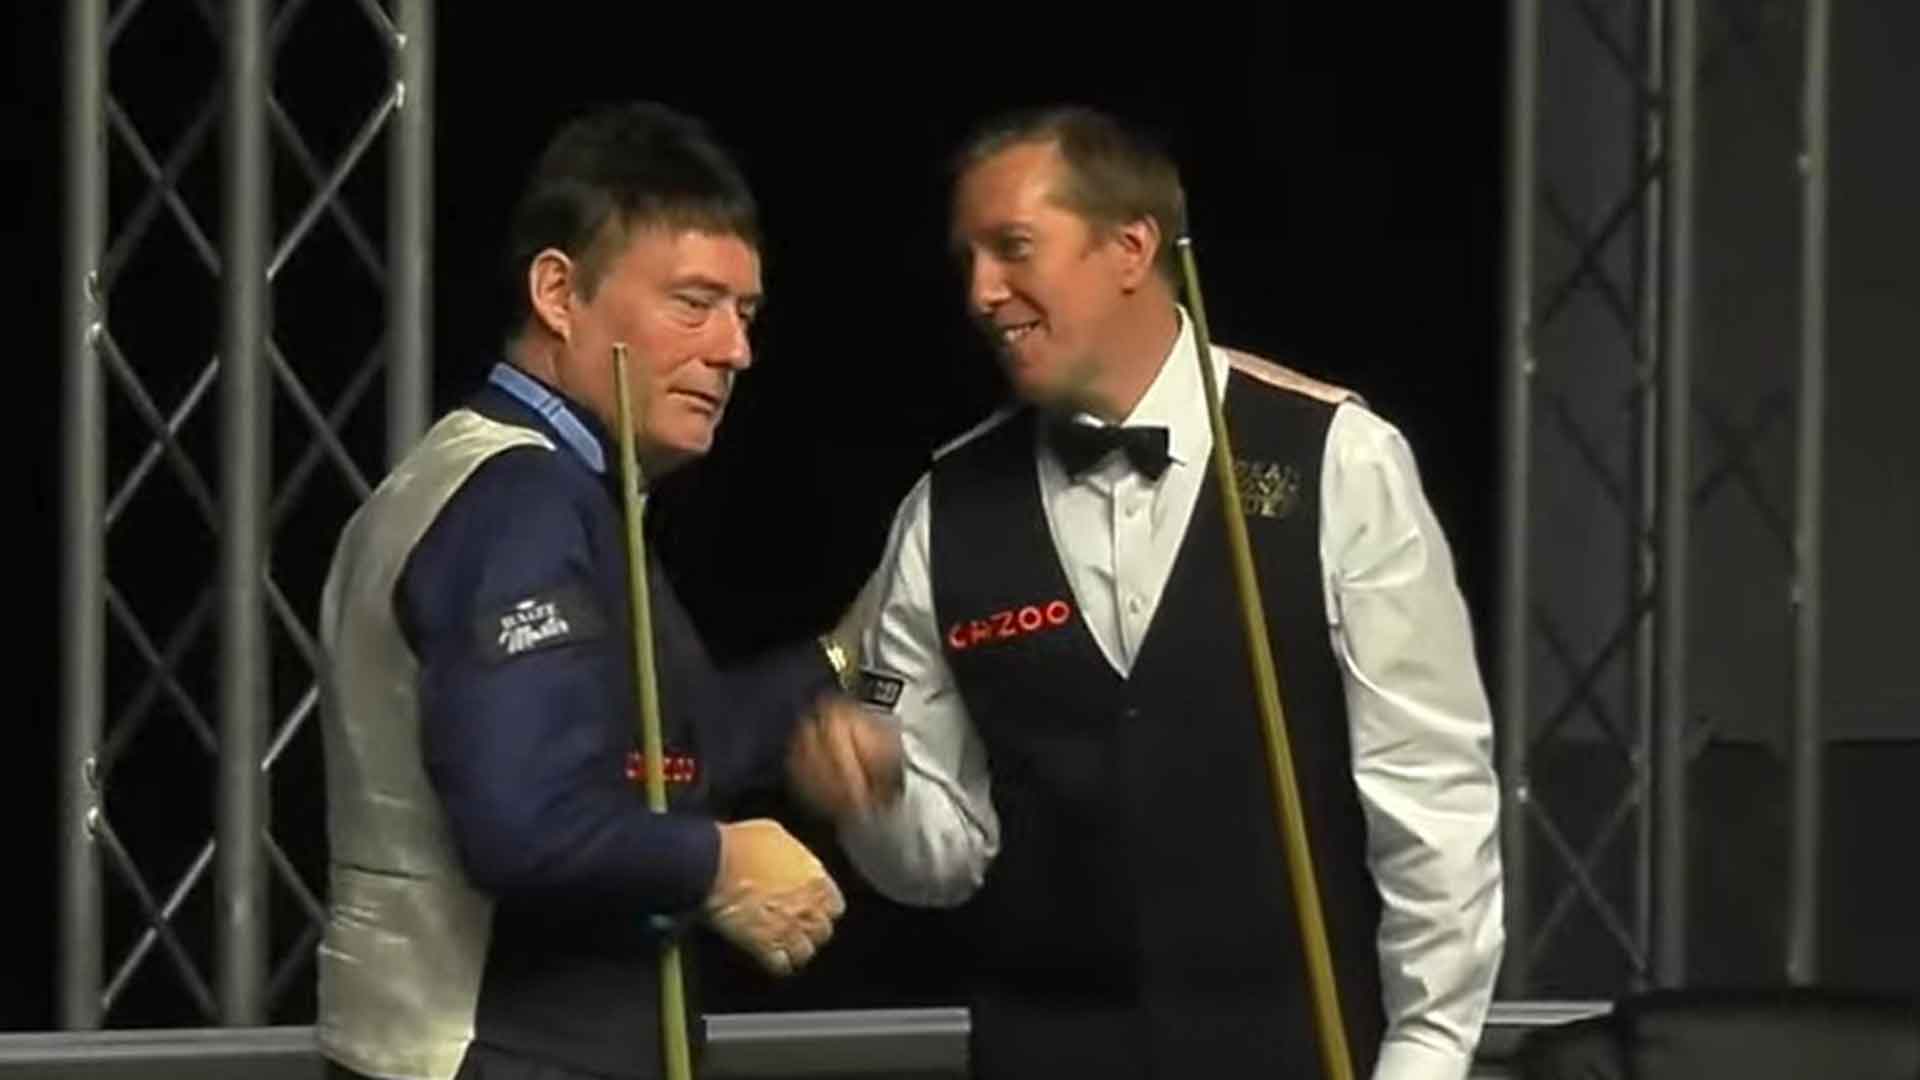 Snooker results Jimmy White rolls back the years to qualify for the UK Championship after beating Dominic Dale